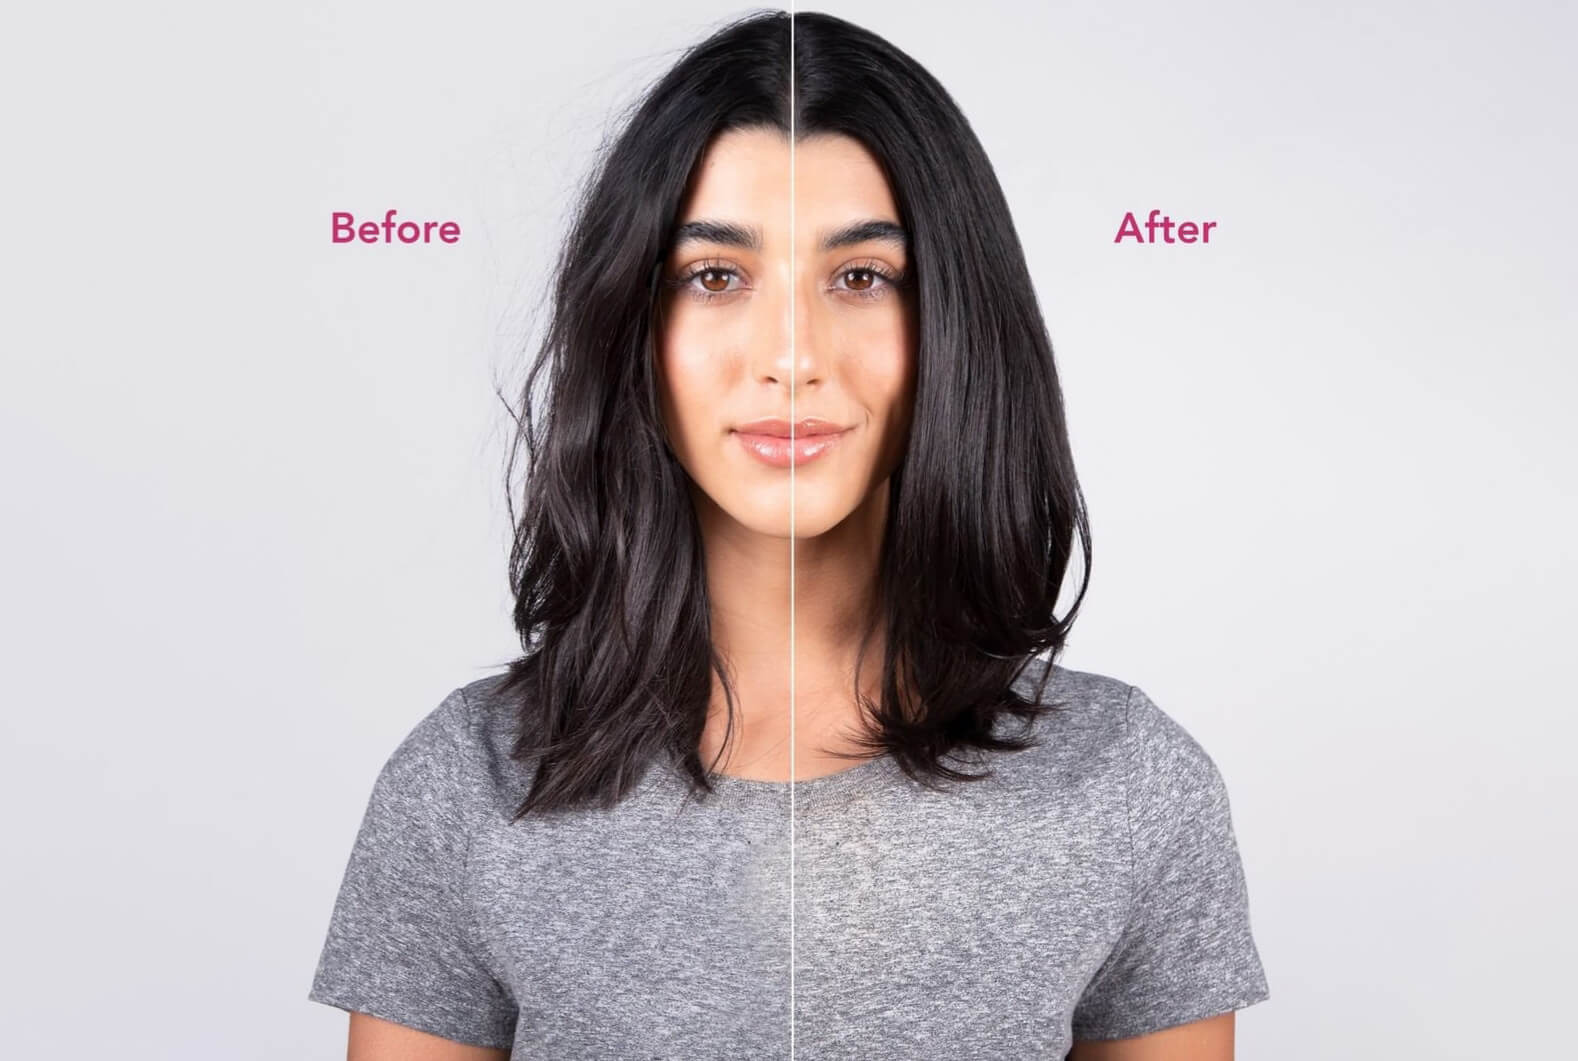 Before and After_taninoplastia-hair-treatment-salon Toujours Belle in Montreal